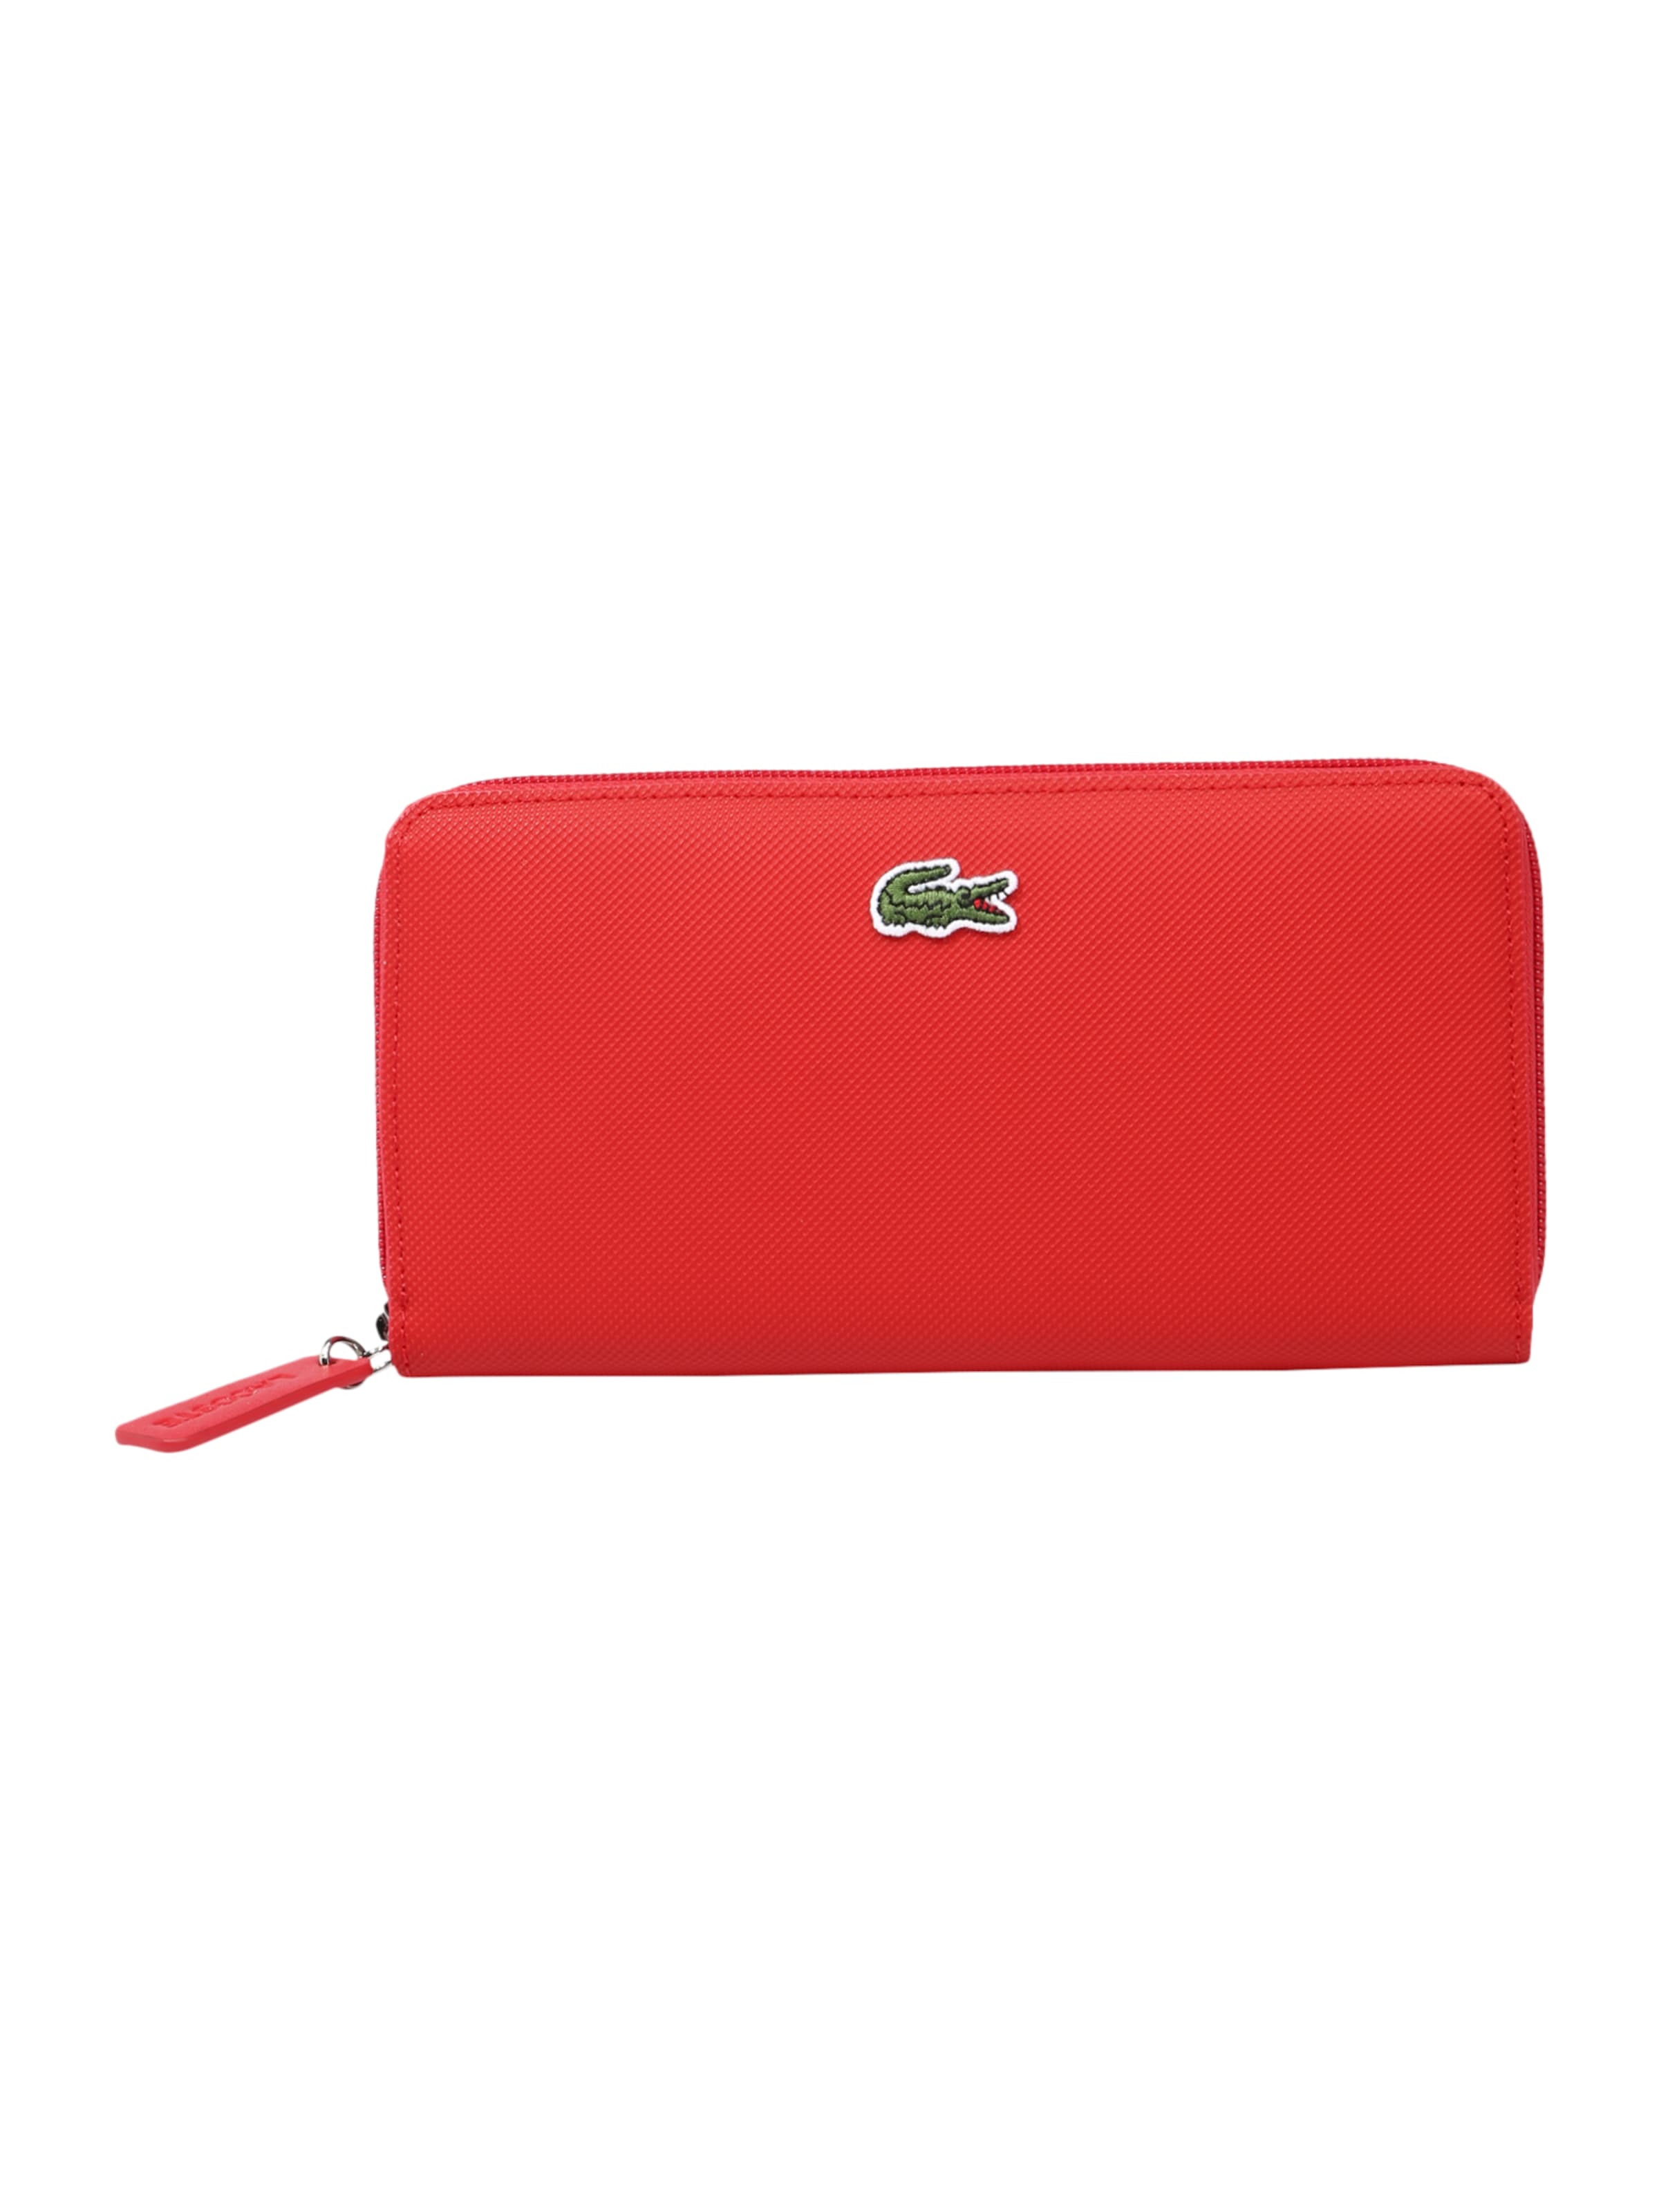 lacoste wallet red